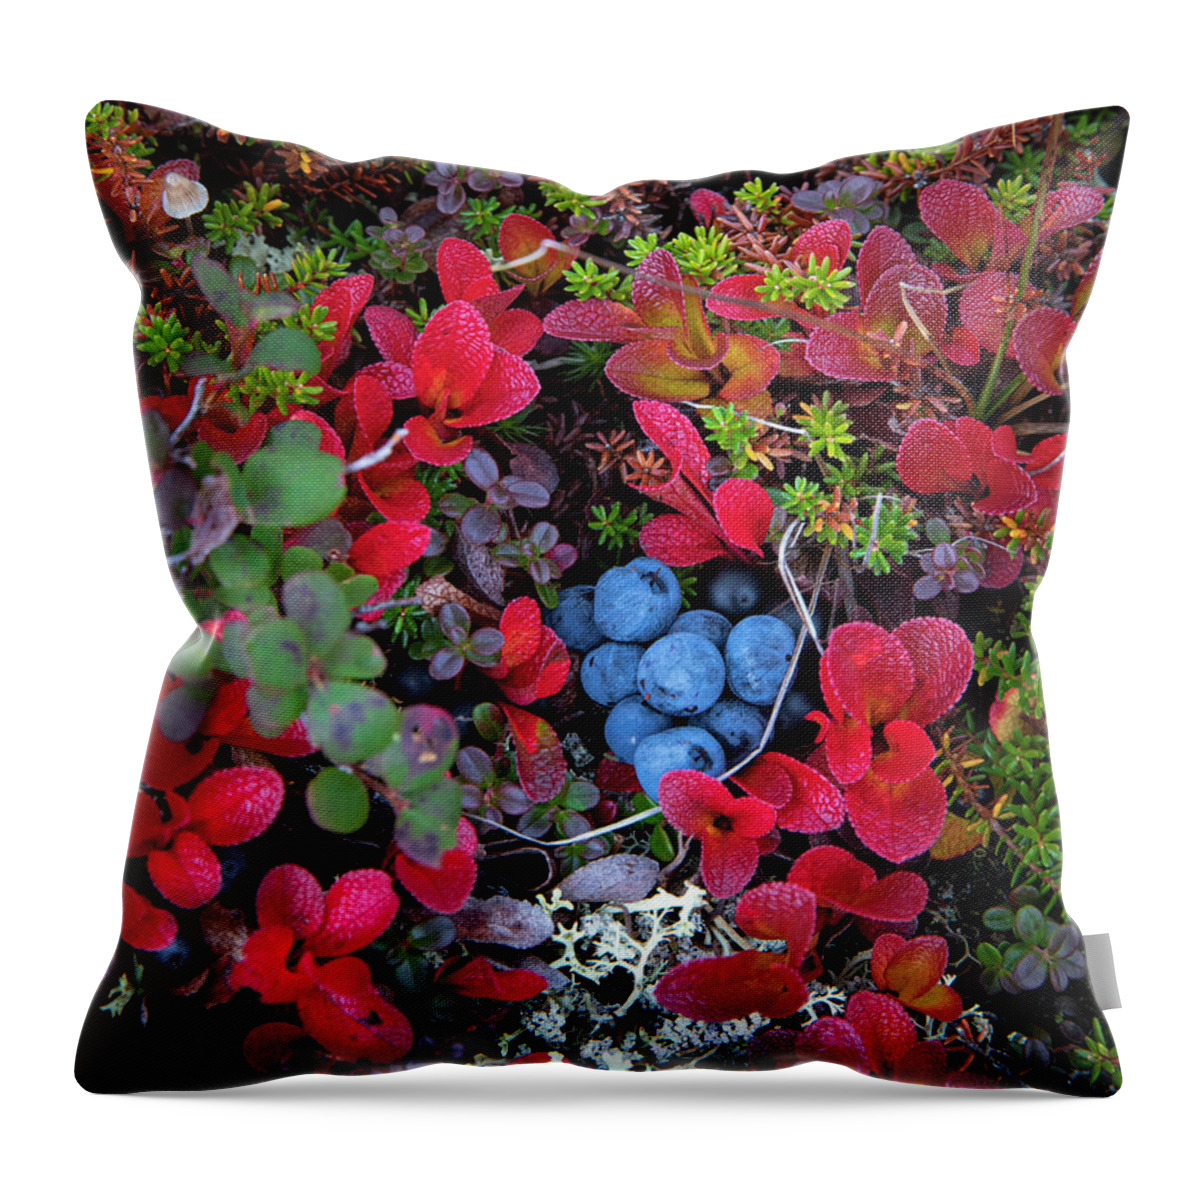 Tundra Throw Pillow featuring the photograph Tundra Harvest by Scott Slone